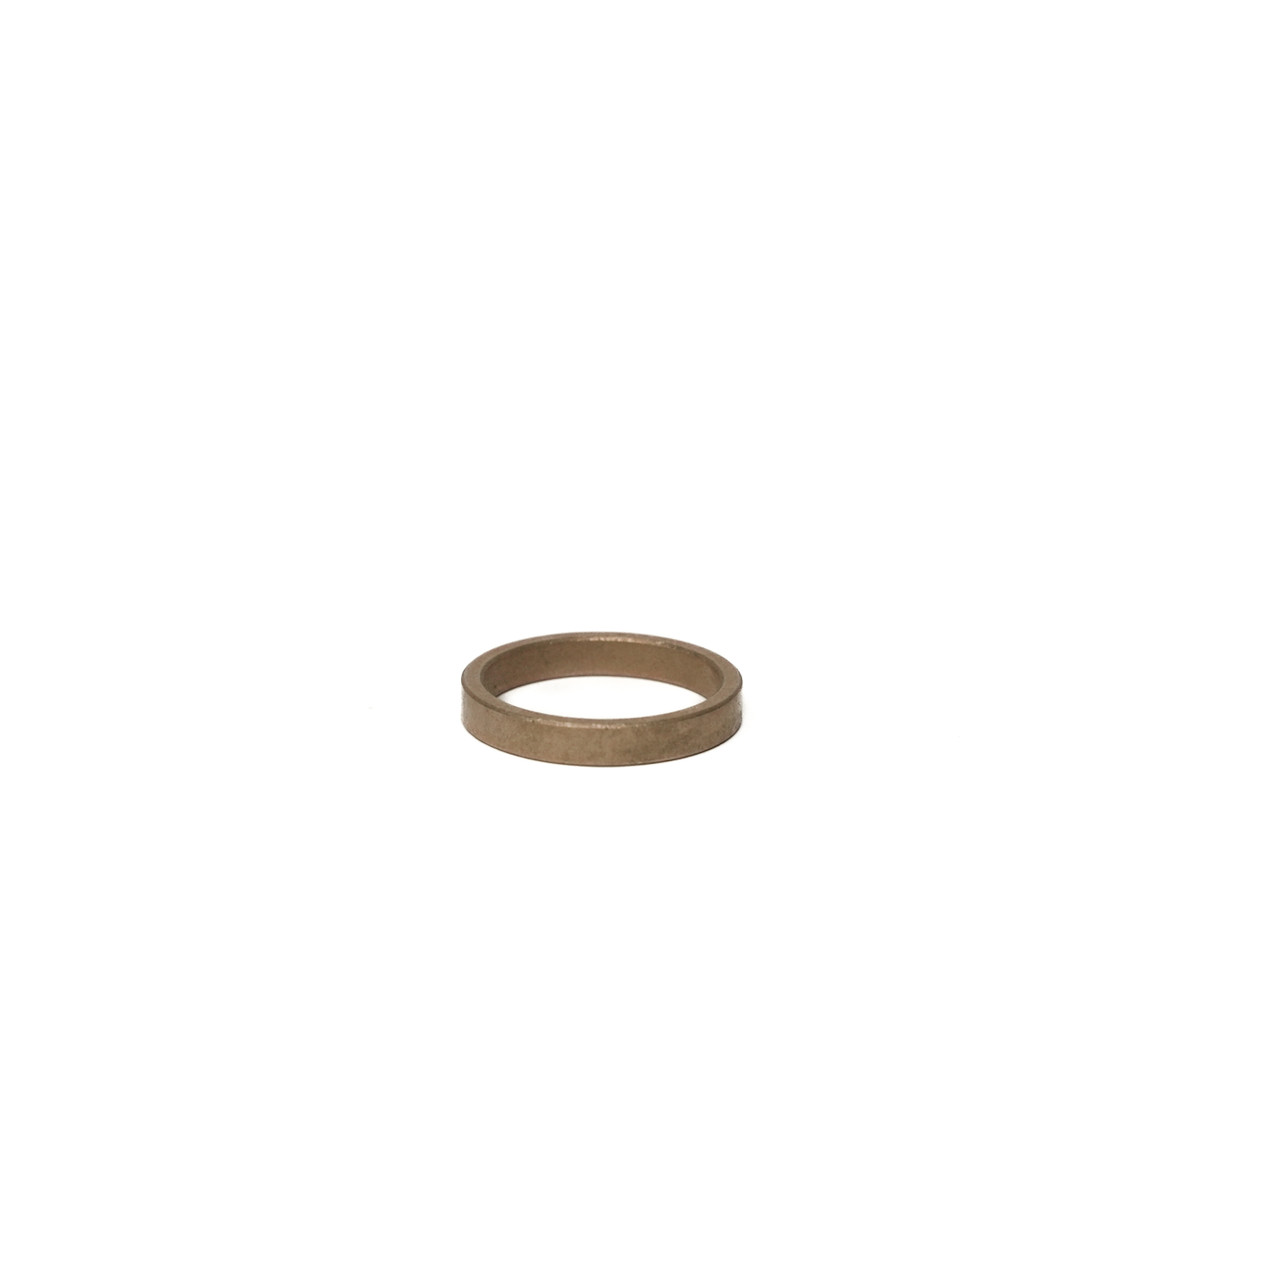 Comet Bronze Bushing (203031A) One (1) Bronze loop on a white background.